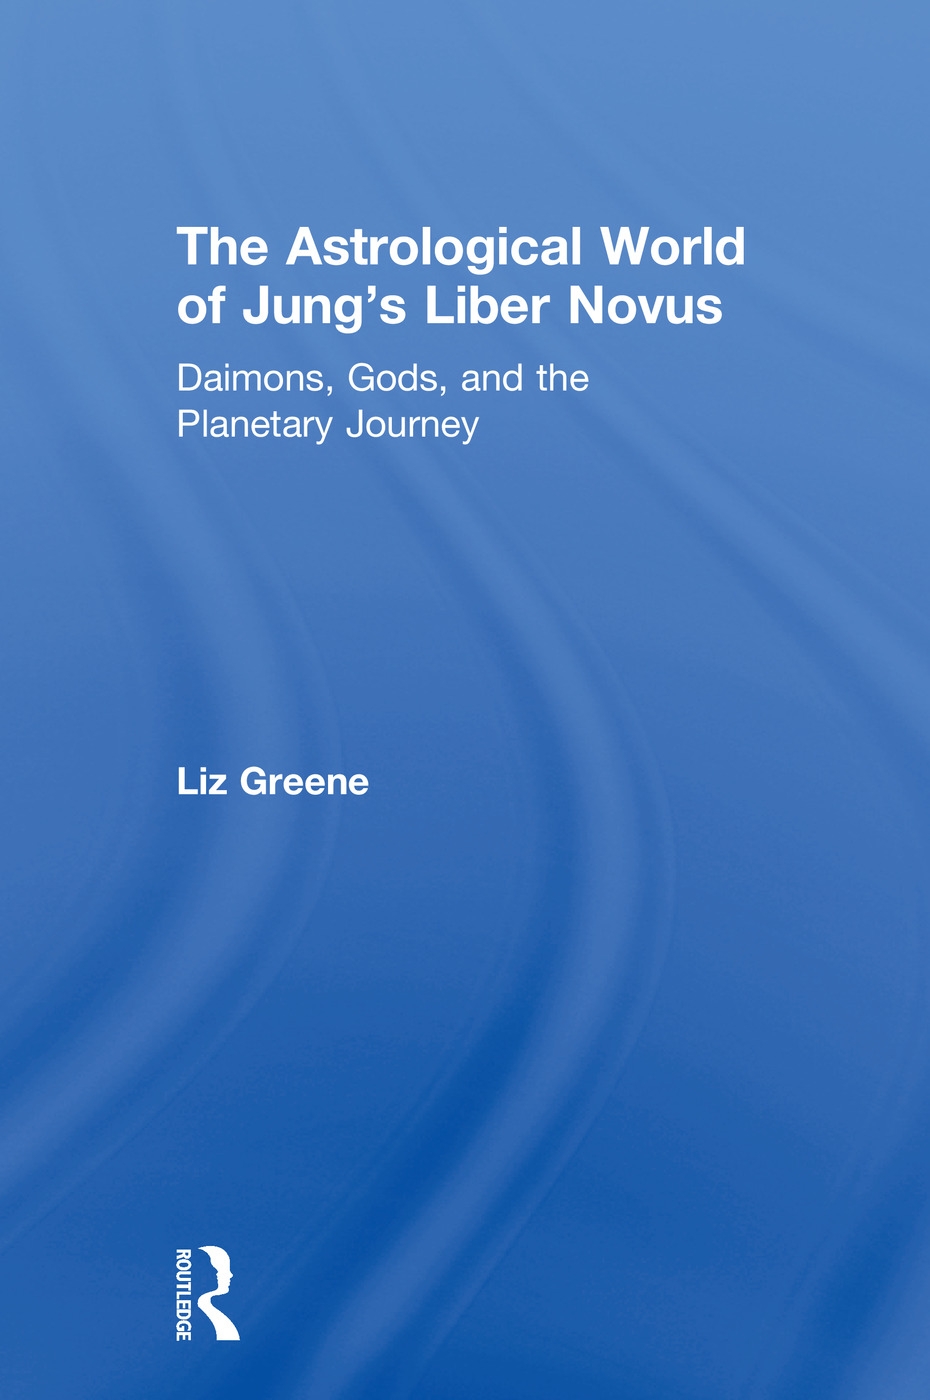 The Astrological World of Jung’s ’liber Novus’: Daimons, Gods, and the Planetary Journey